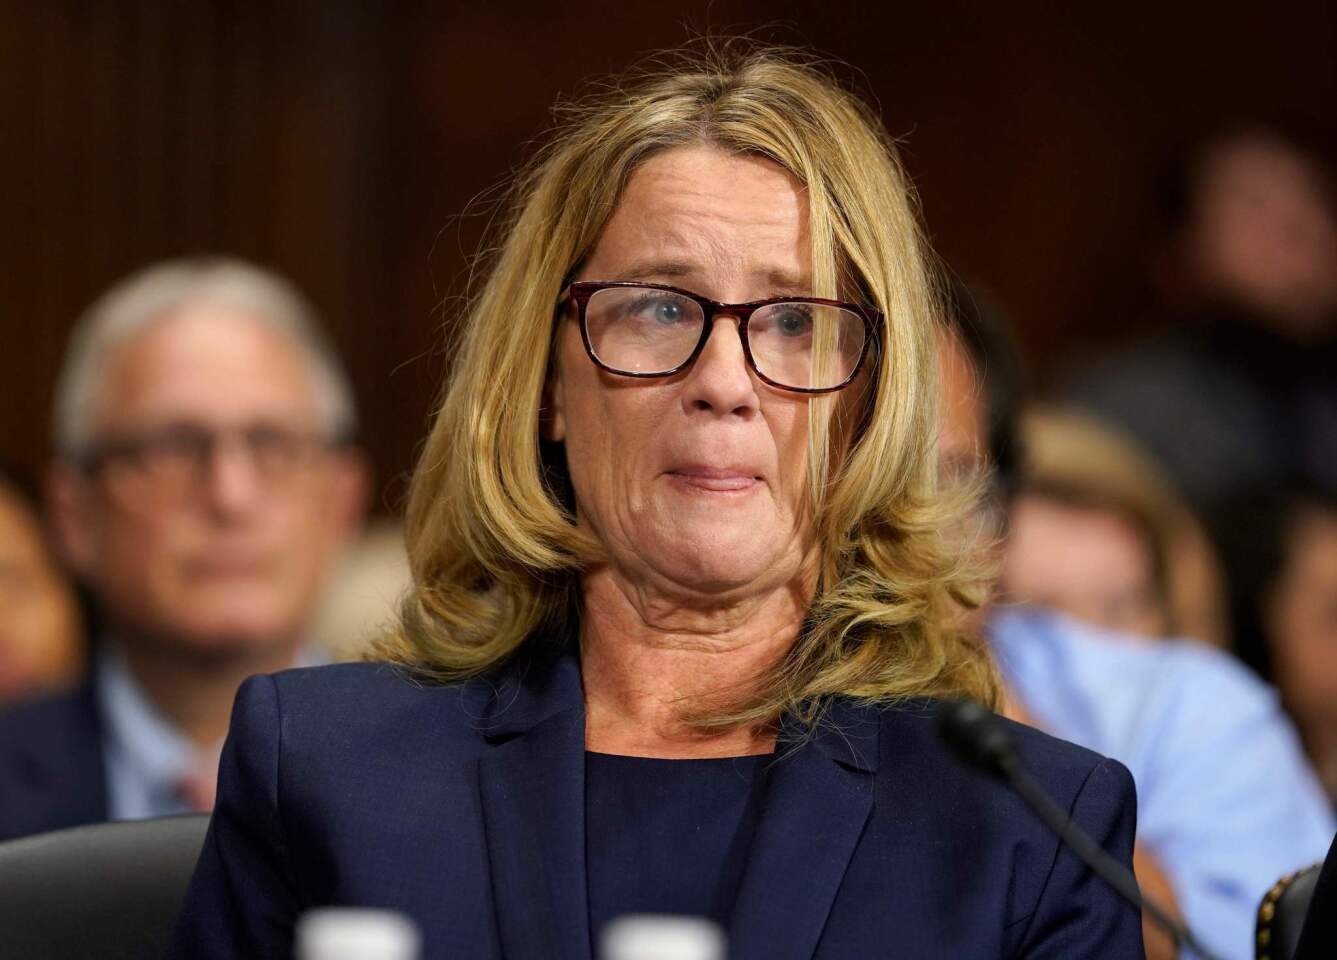 Dr. Christine Blasey Ford speaks before the Senate Judiciary Committee hearing on the nomination of Brett Kavanaugh to be an associate justice of the Supreme Court of the United States, on Capitol Hill.